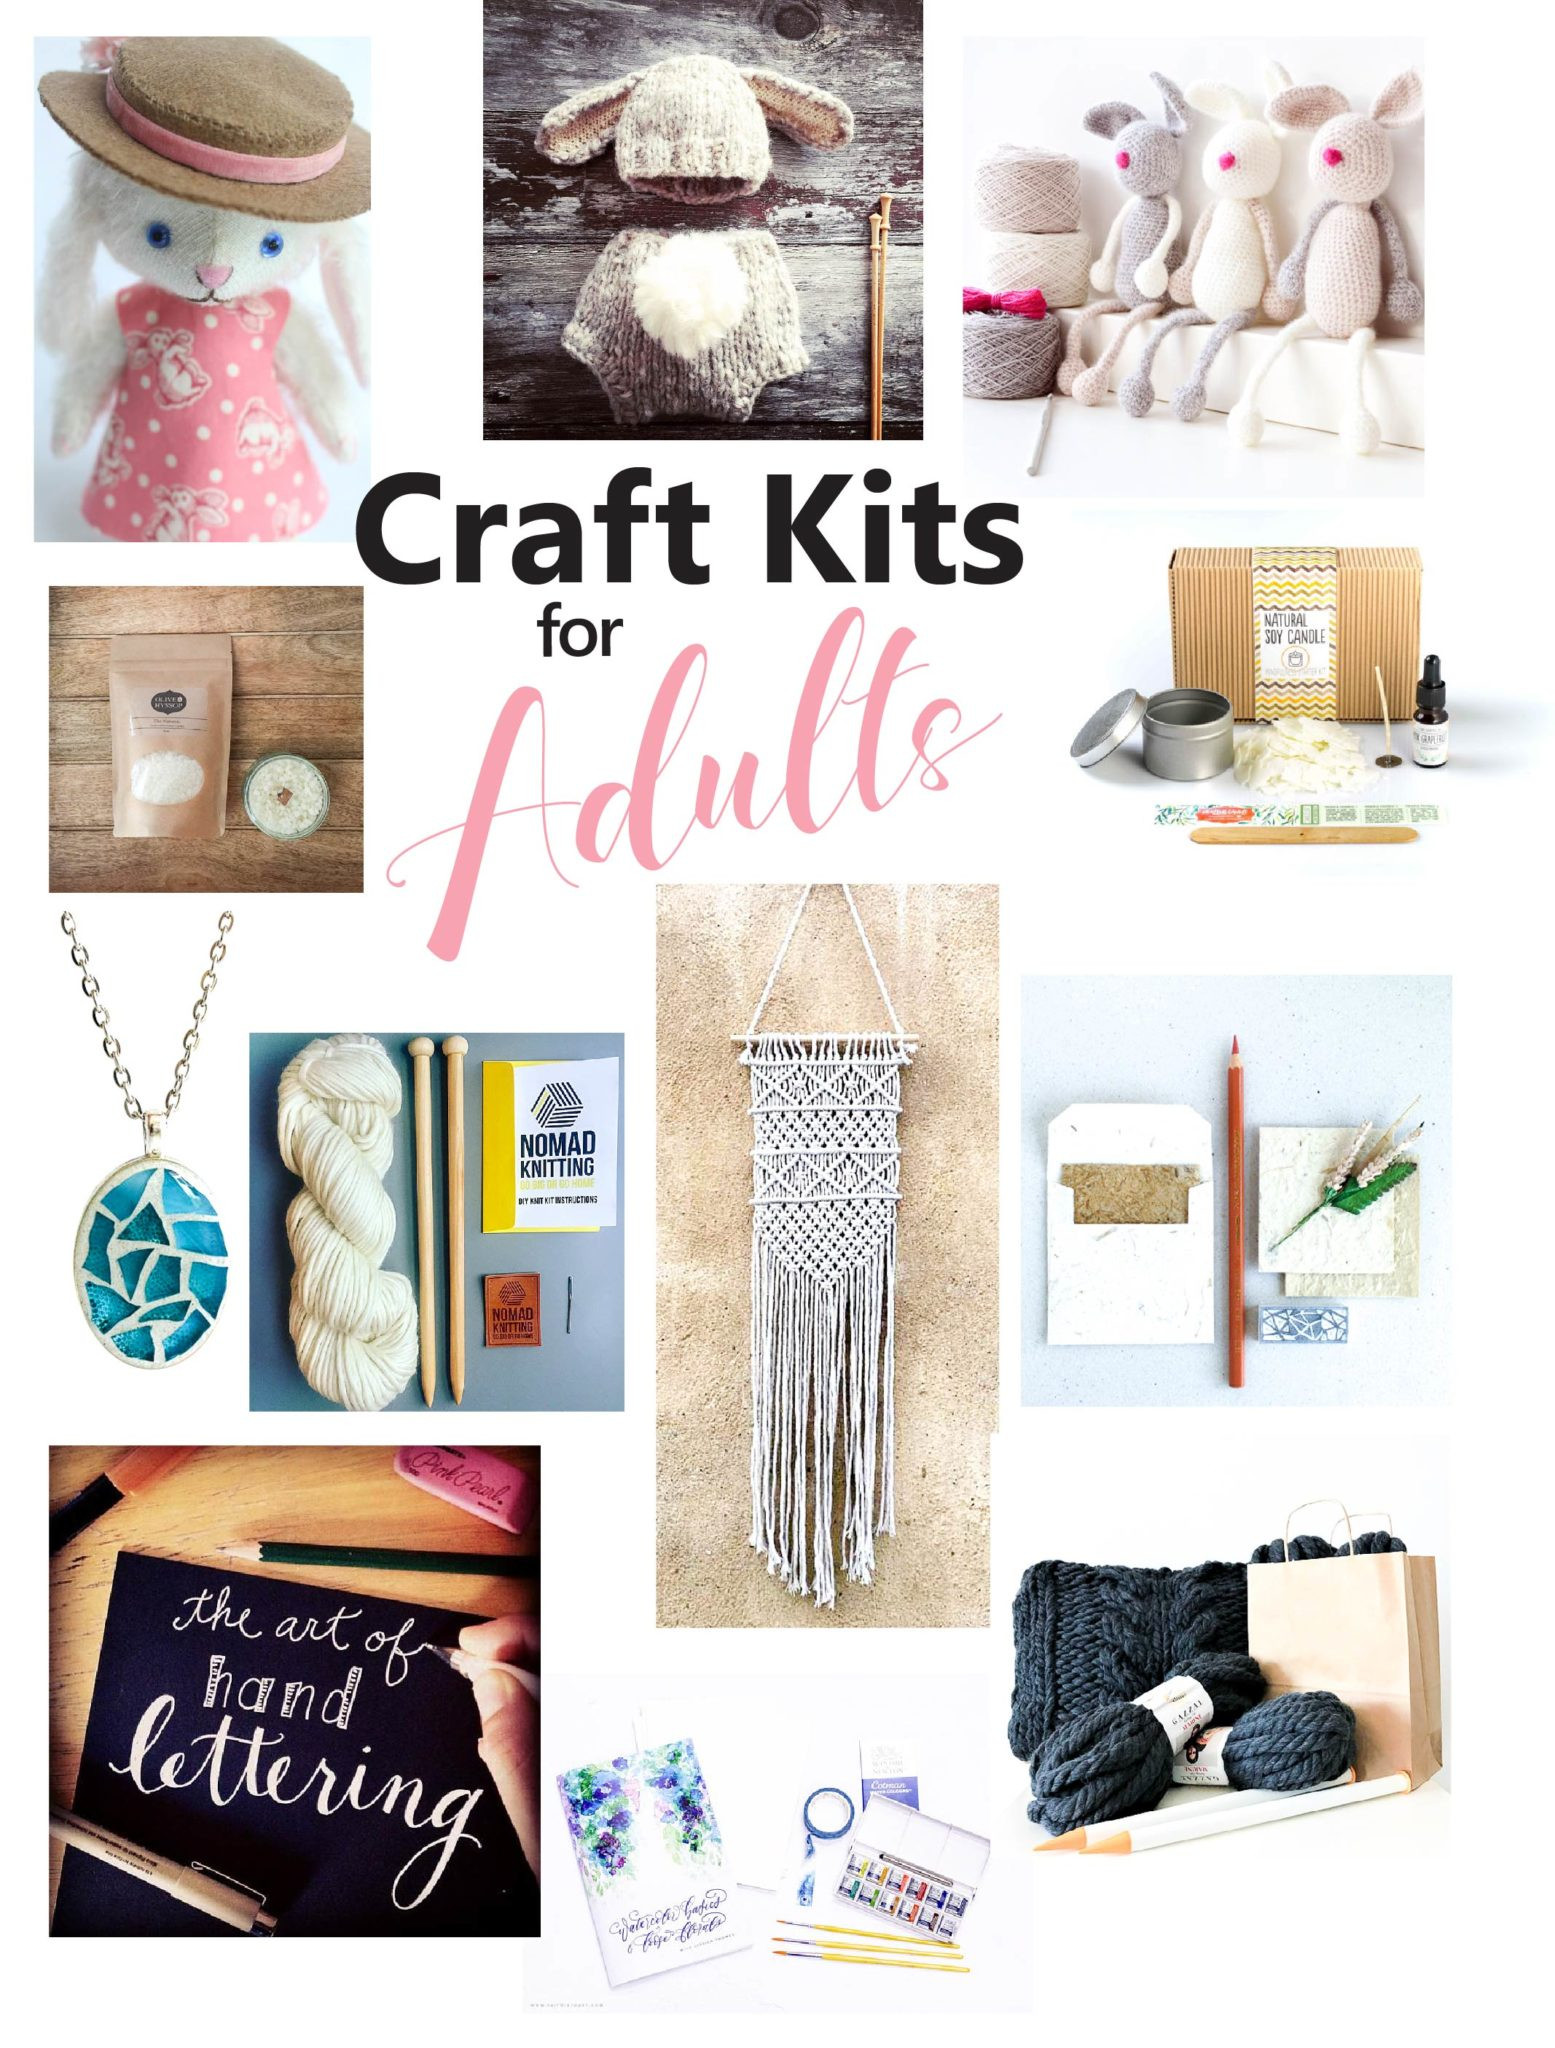 DIY Craft Kits For Adults
 The Best Craft Kits for Adults – Sustain My Craft Habit